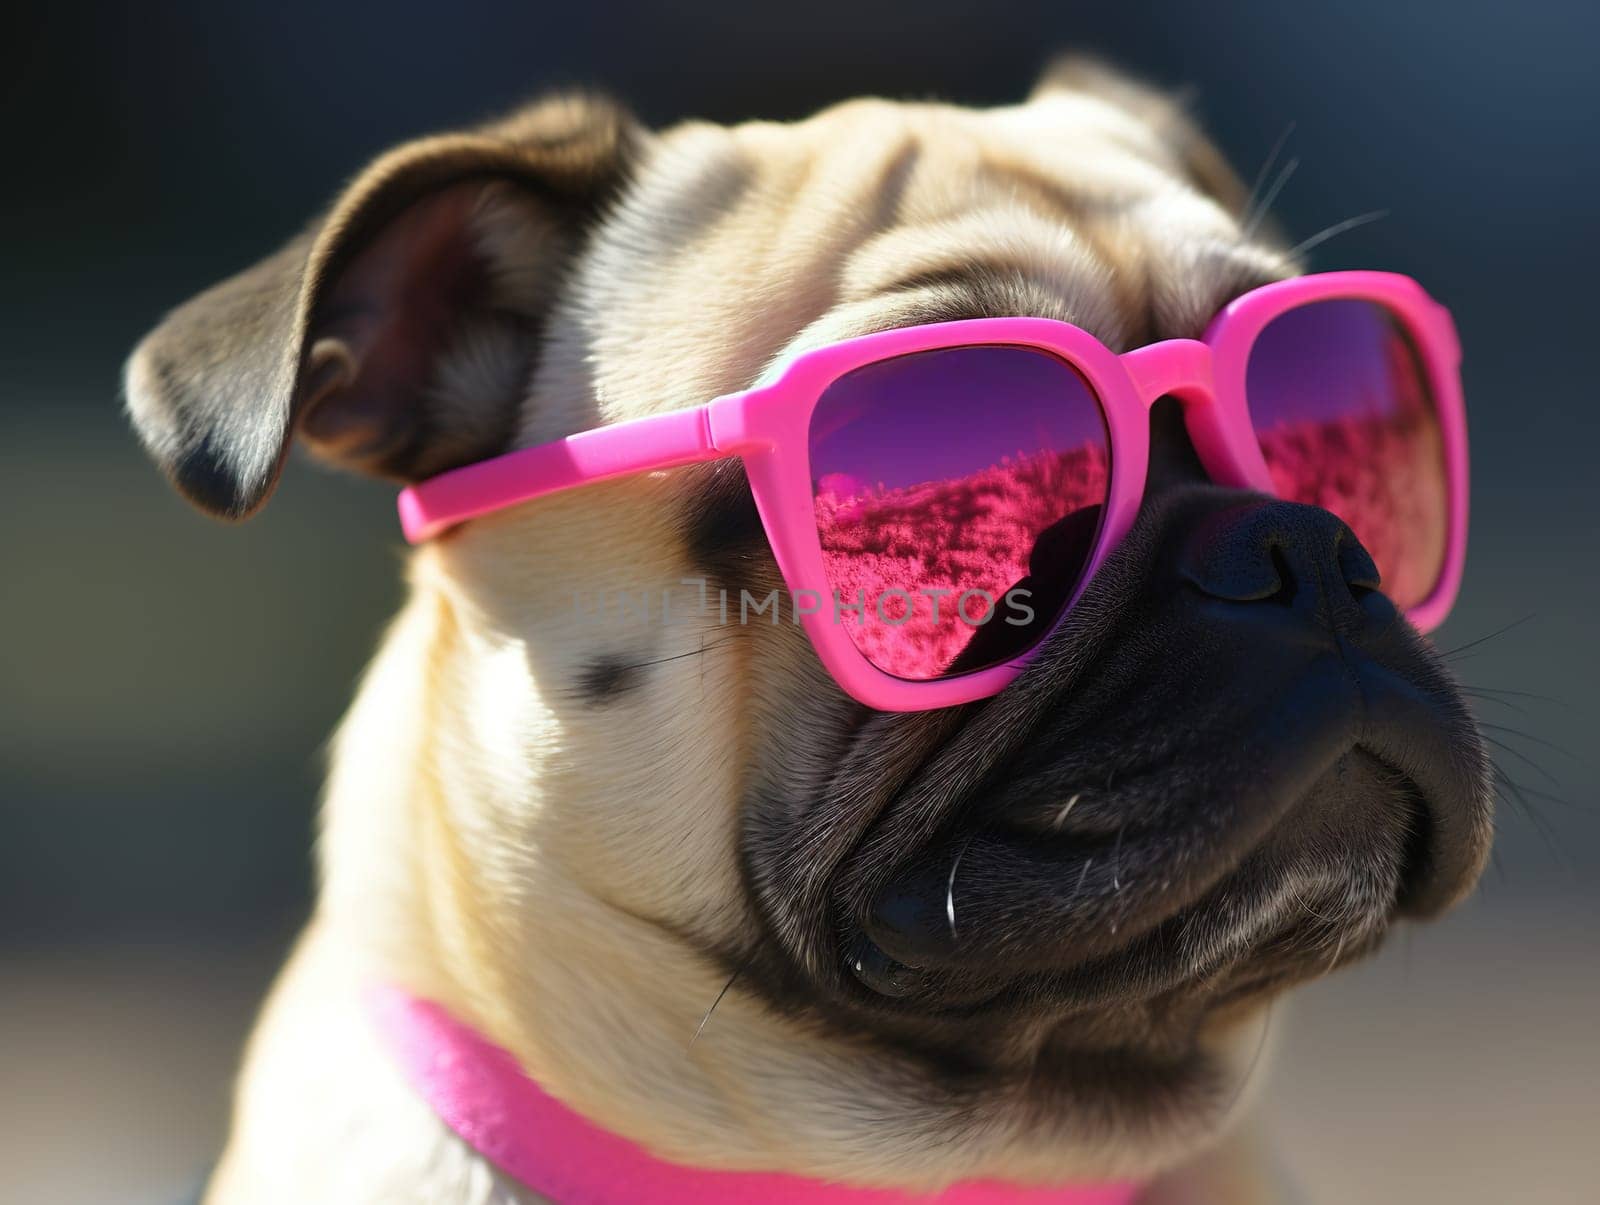 Adorable Humorous Pug Dog Breed In Pink Sunglasses